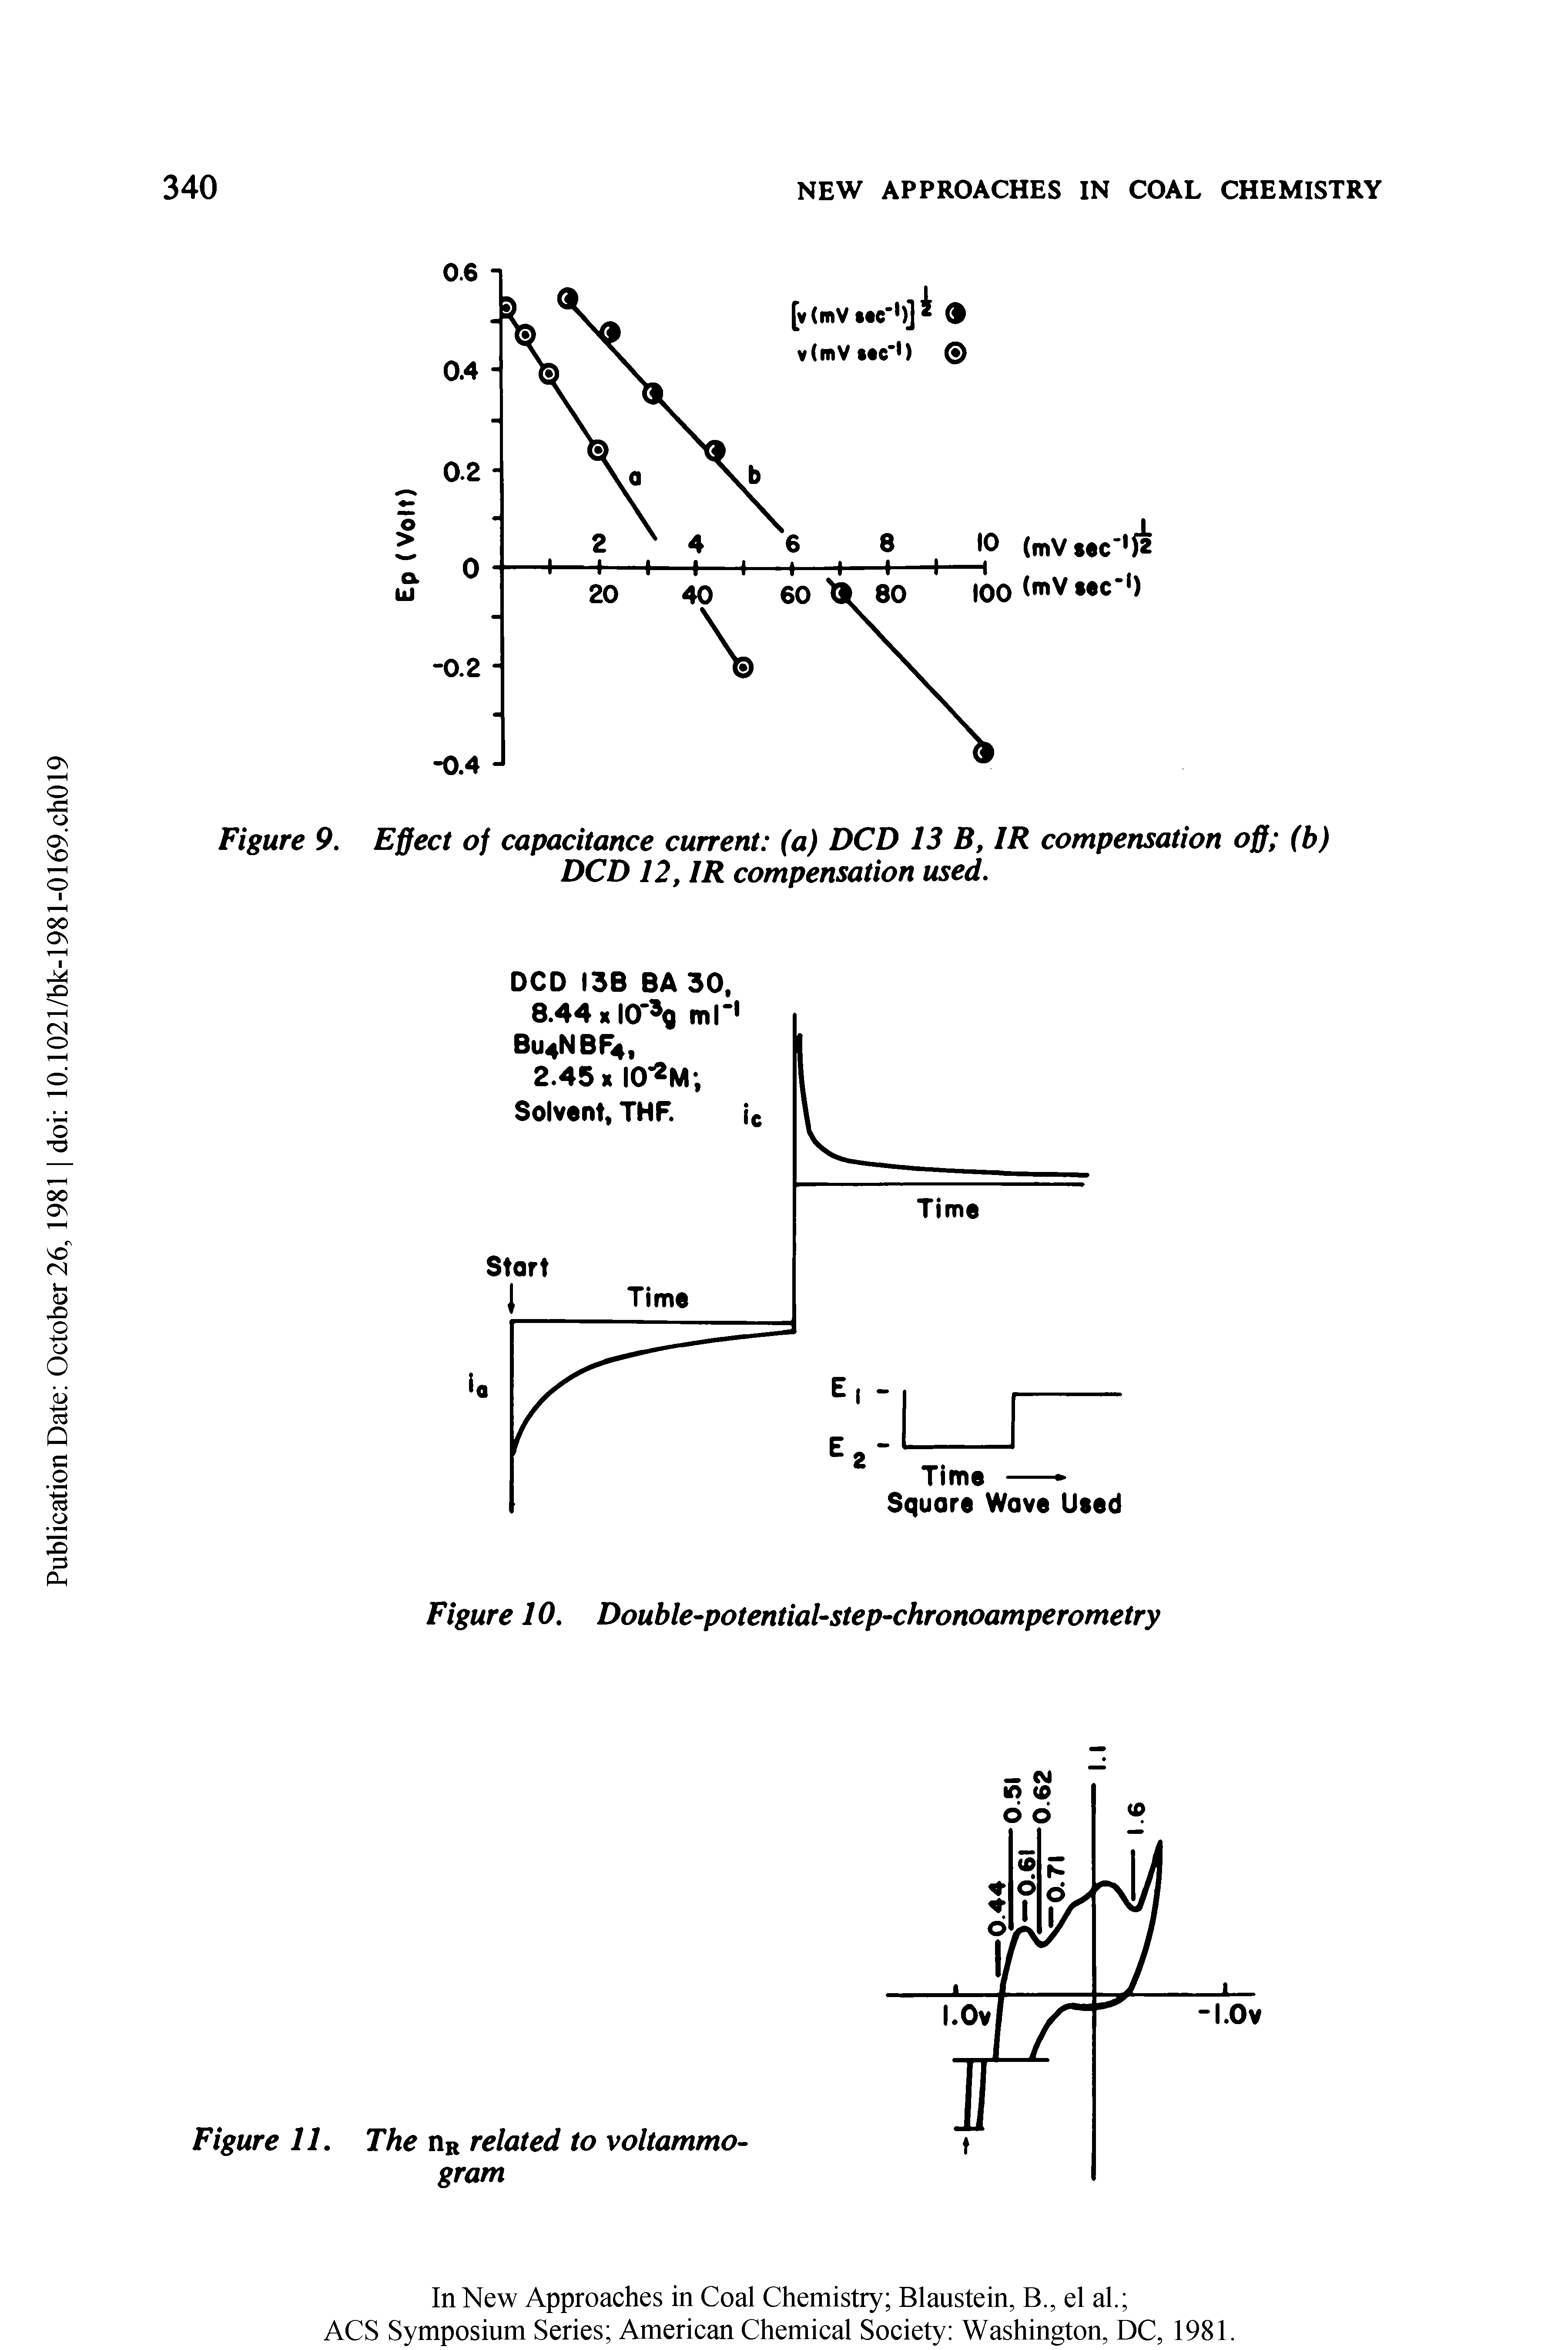 Figure 9. Effect of capacitance current (a) DCD 13 B, IR compensation off (b) DCD 12, IR compensation used.